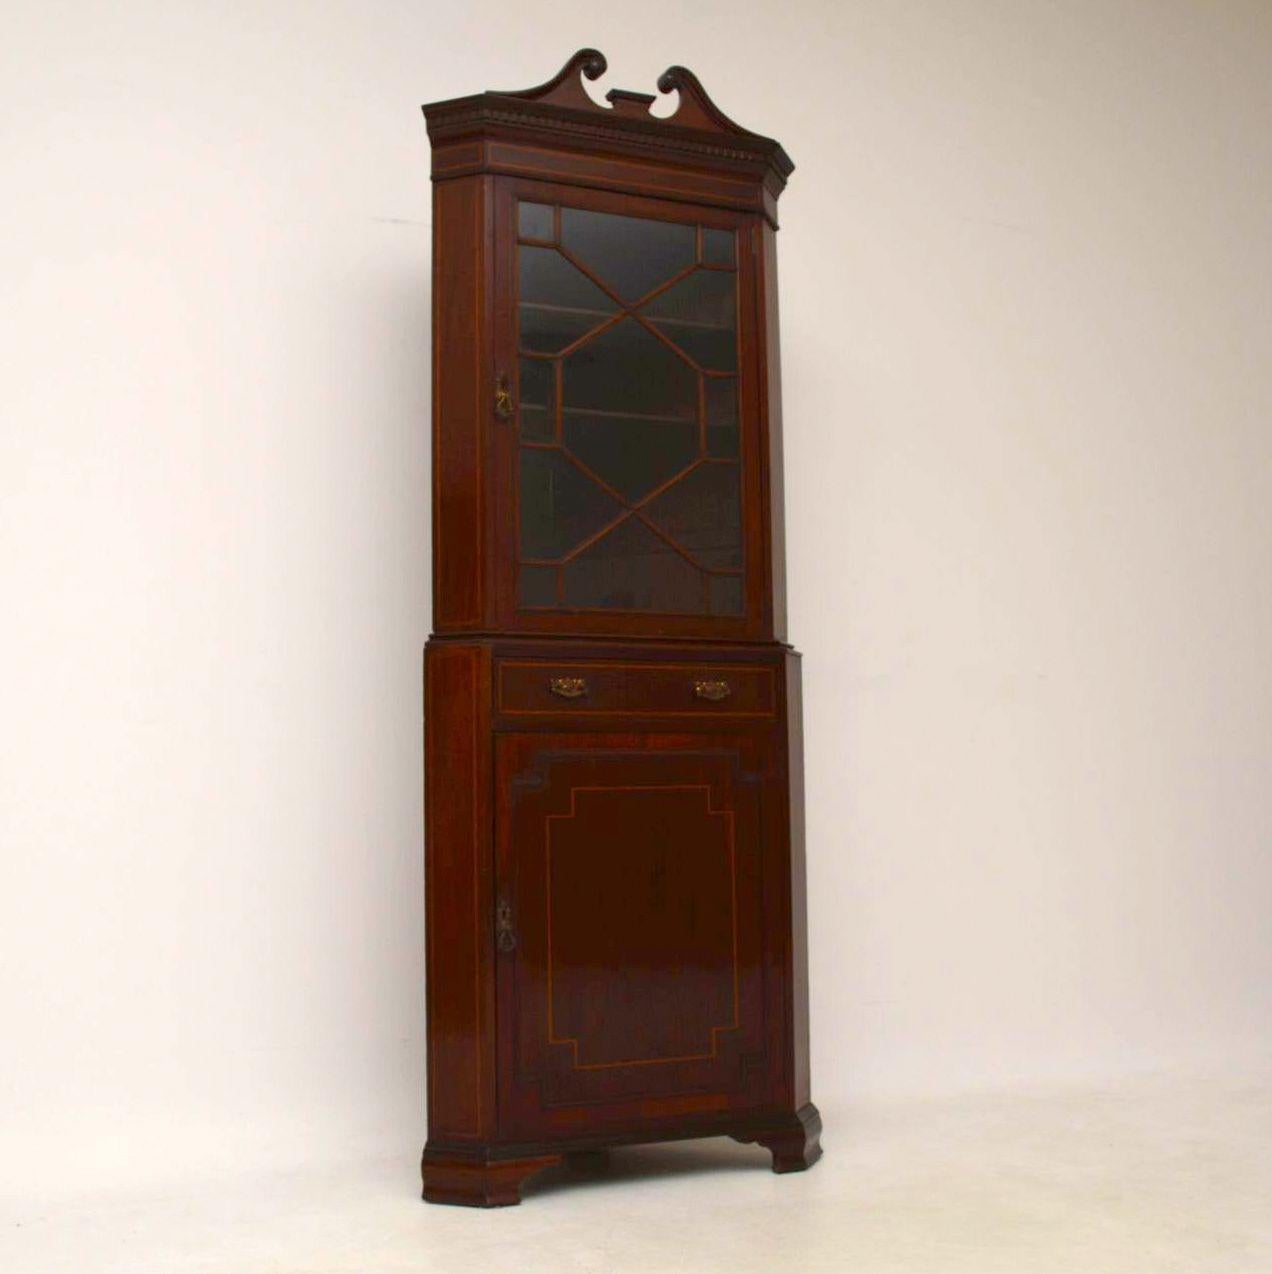 Antique Edwardian inlaid mahogany corner cabinet with an astral-glazed top section and cupboard below. It’s in good original condition and comes apart into two sections for easy transportation. There is a swan neck pediment on the top with a dental